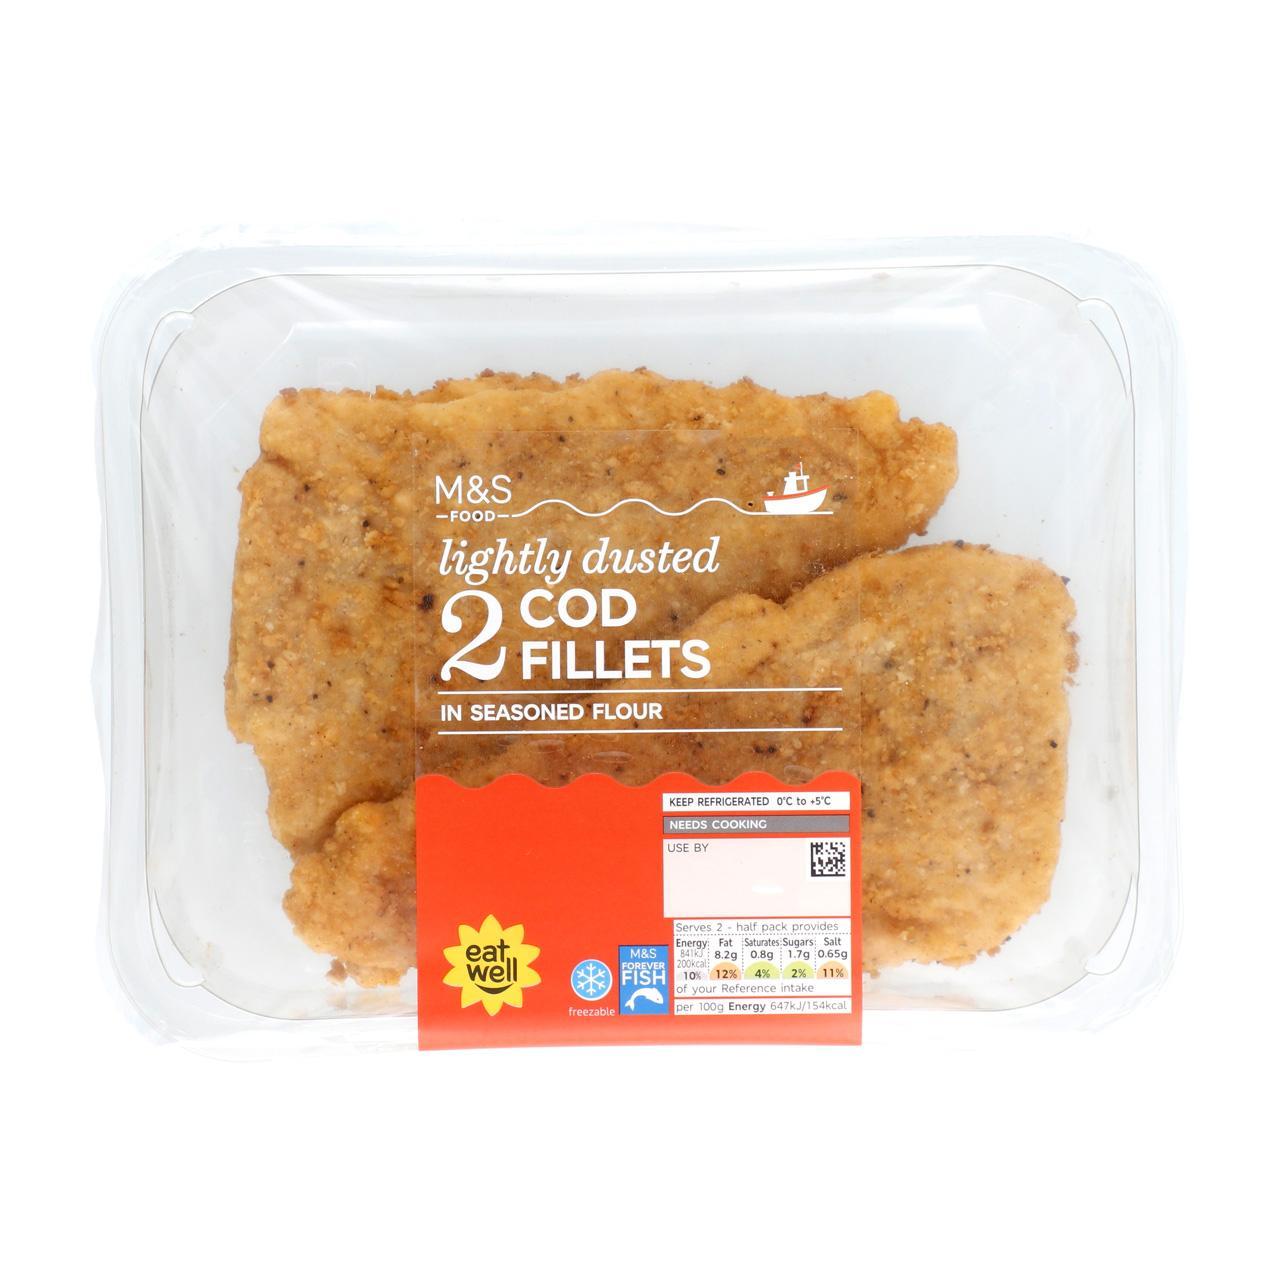 M&S 2 Lightly Dusted Cod Fillets